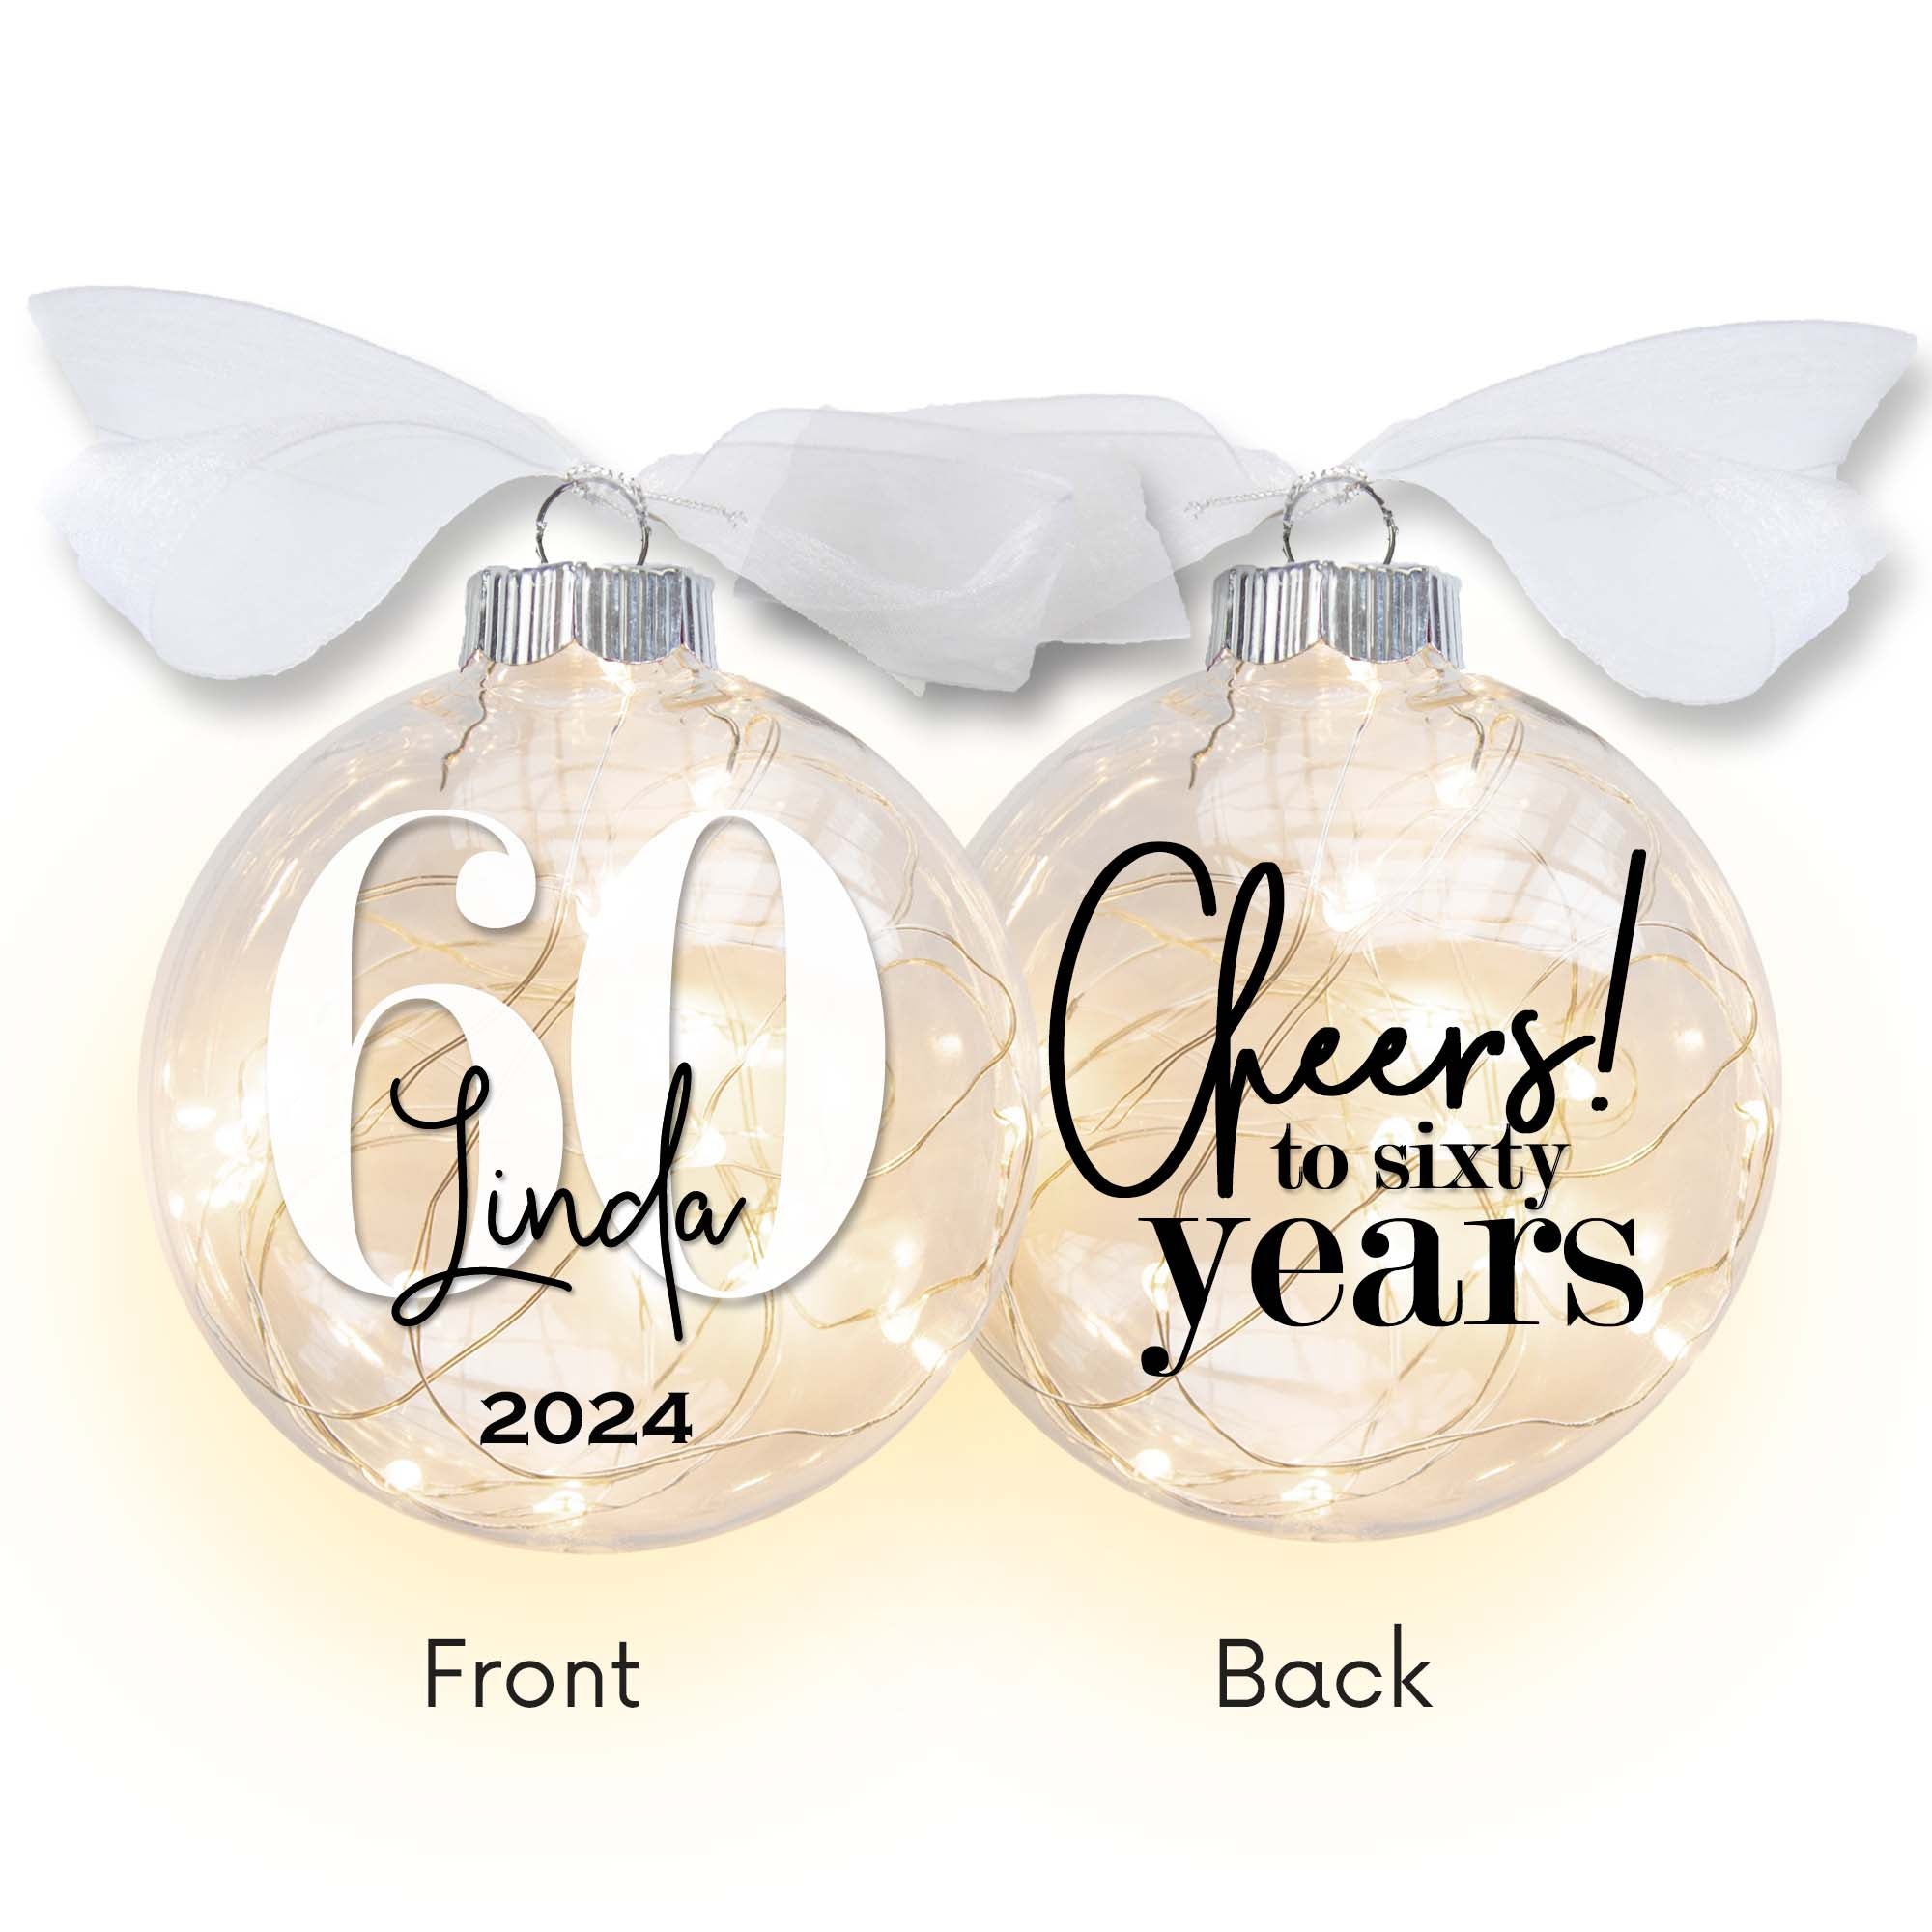 Personalized 60th birthday light up ornament cheers to sixty years